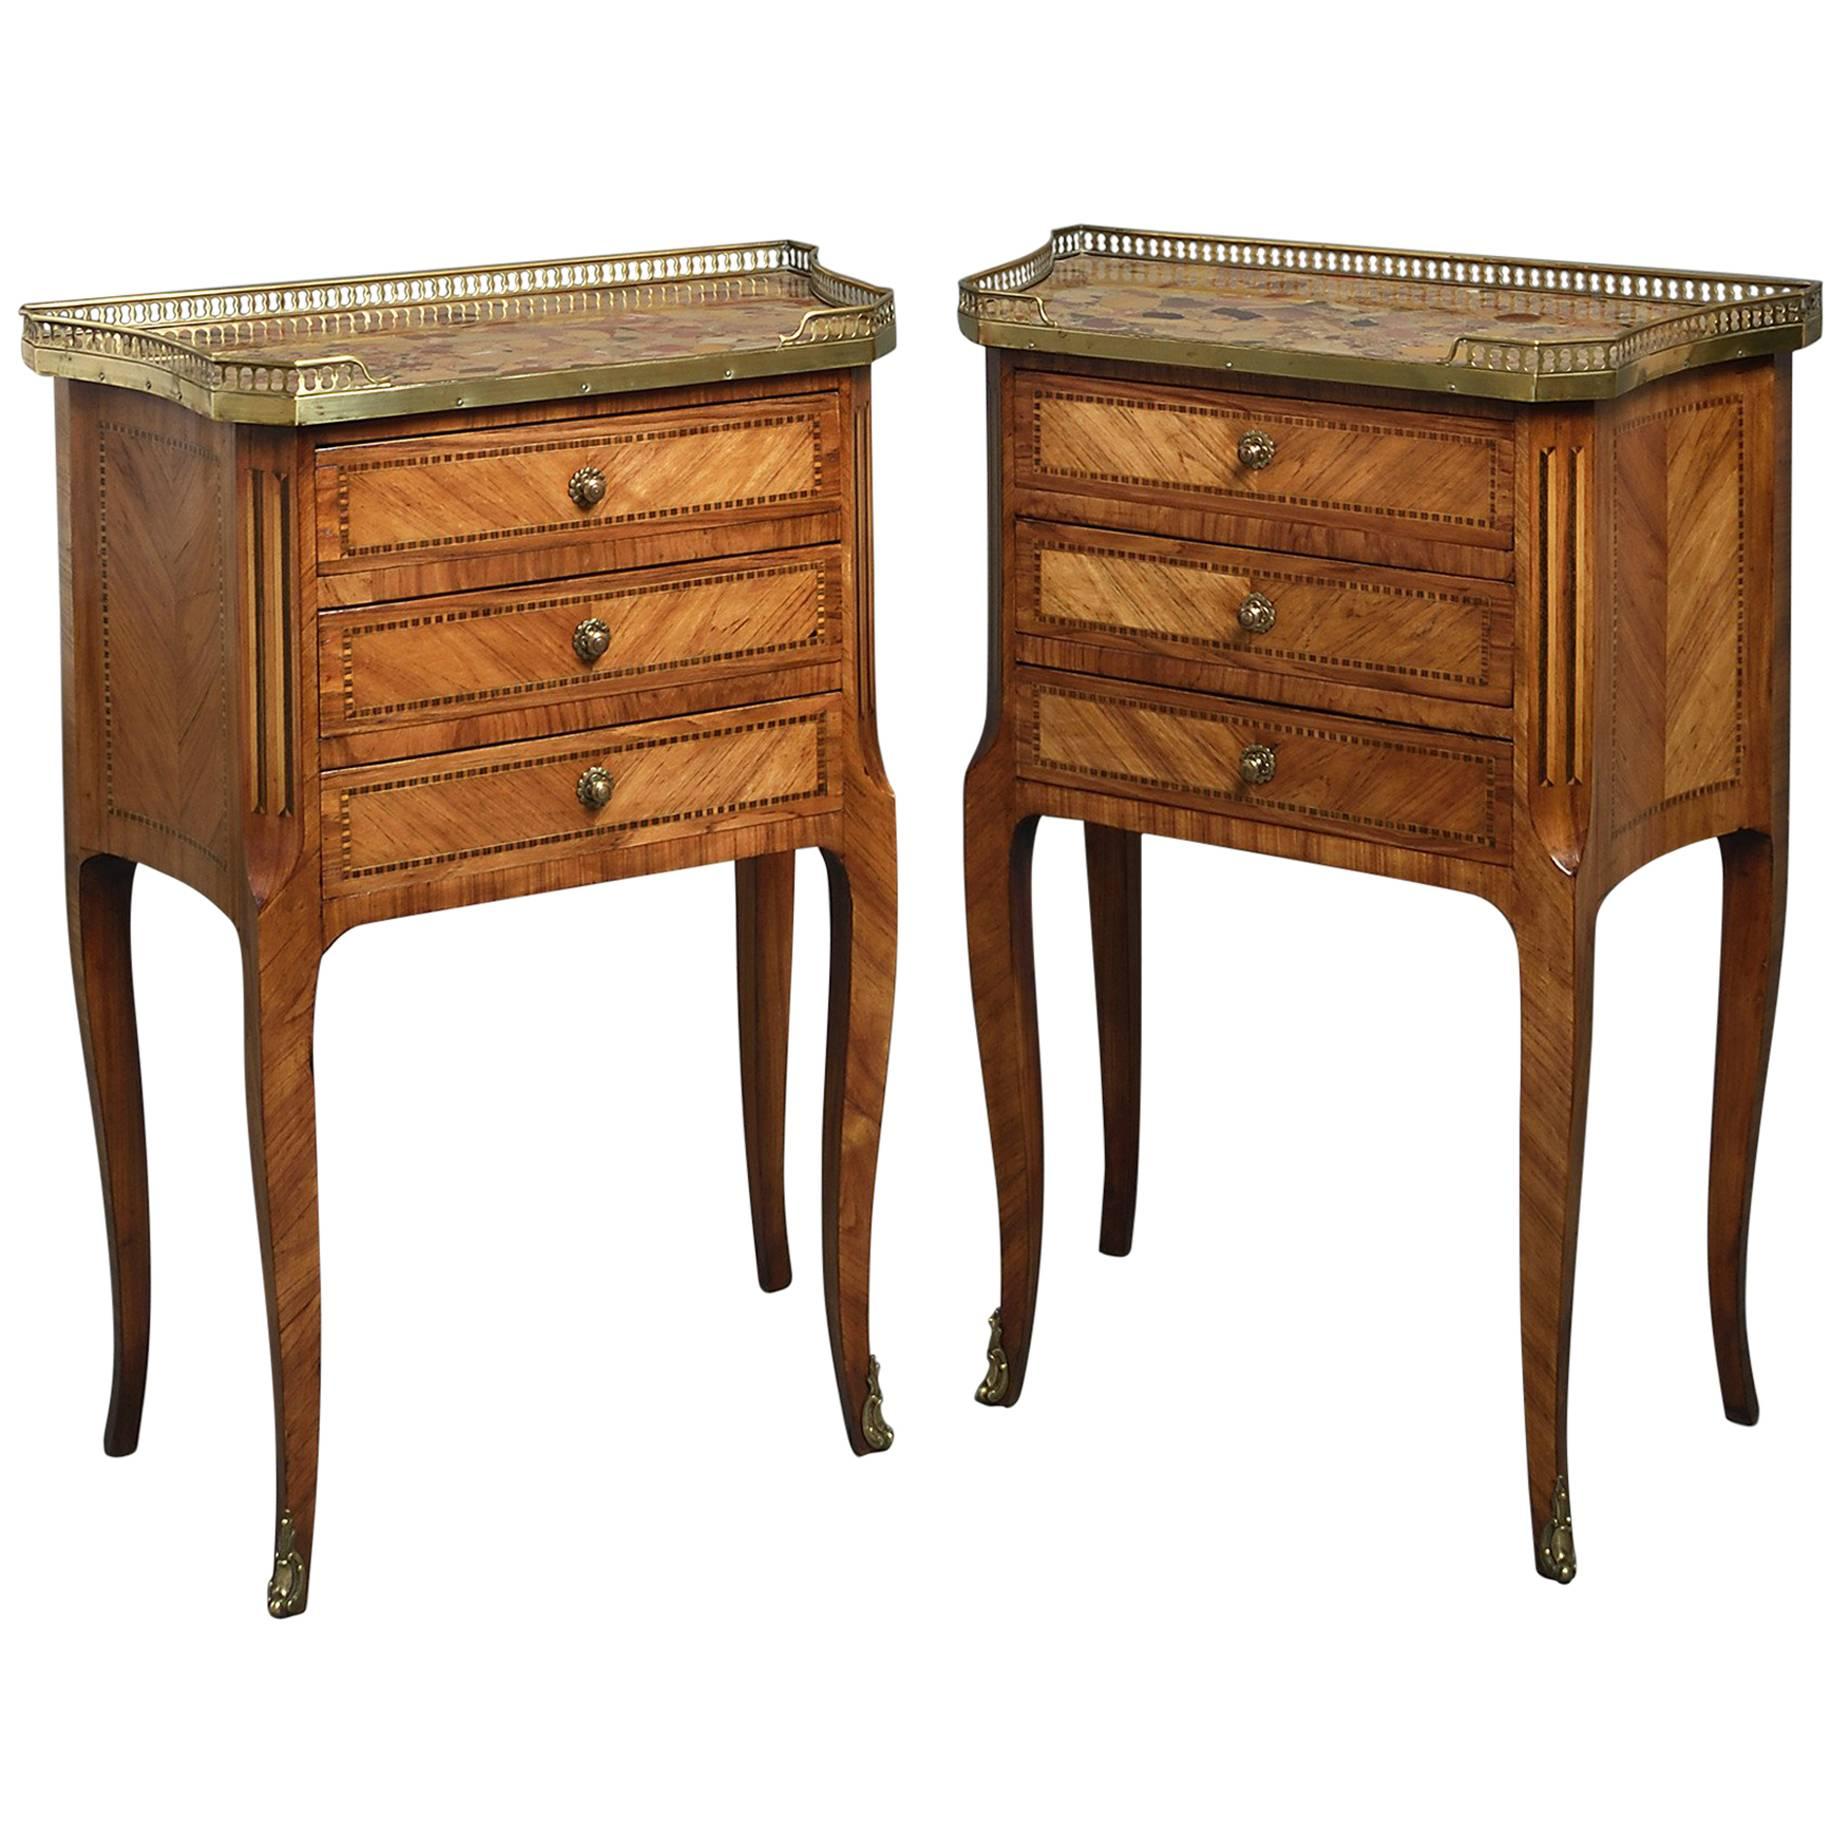 19th Century Pair of Louis XVI Style Bedside Cabinets